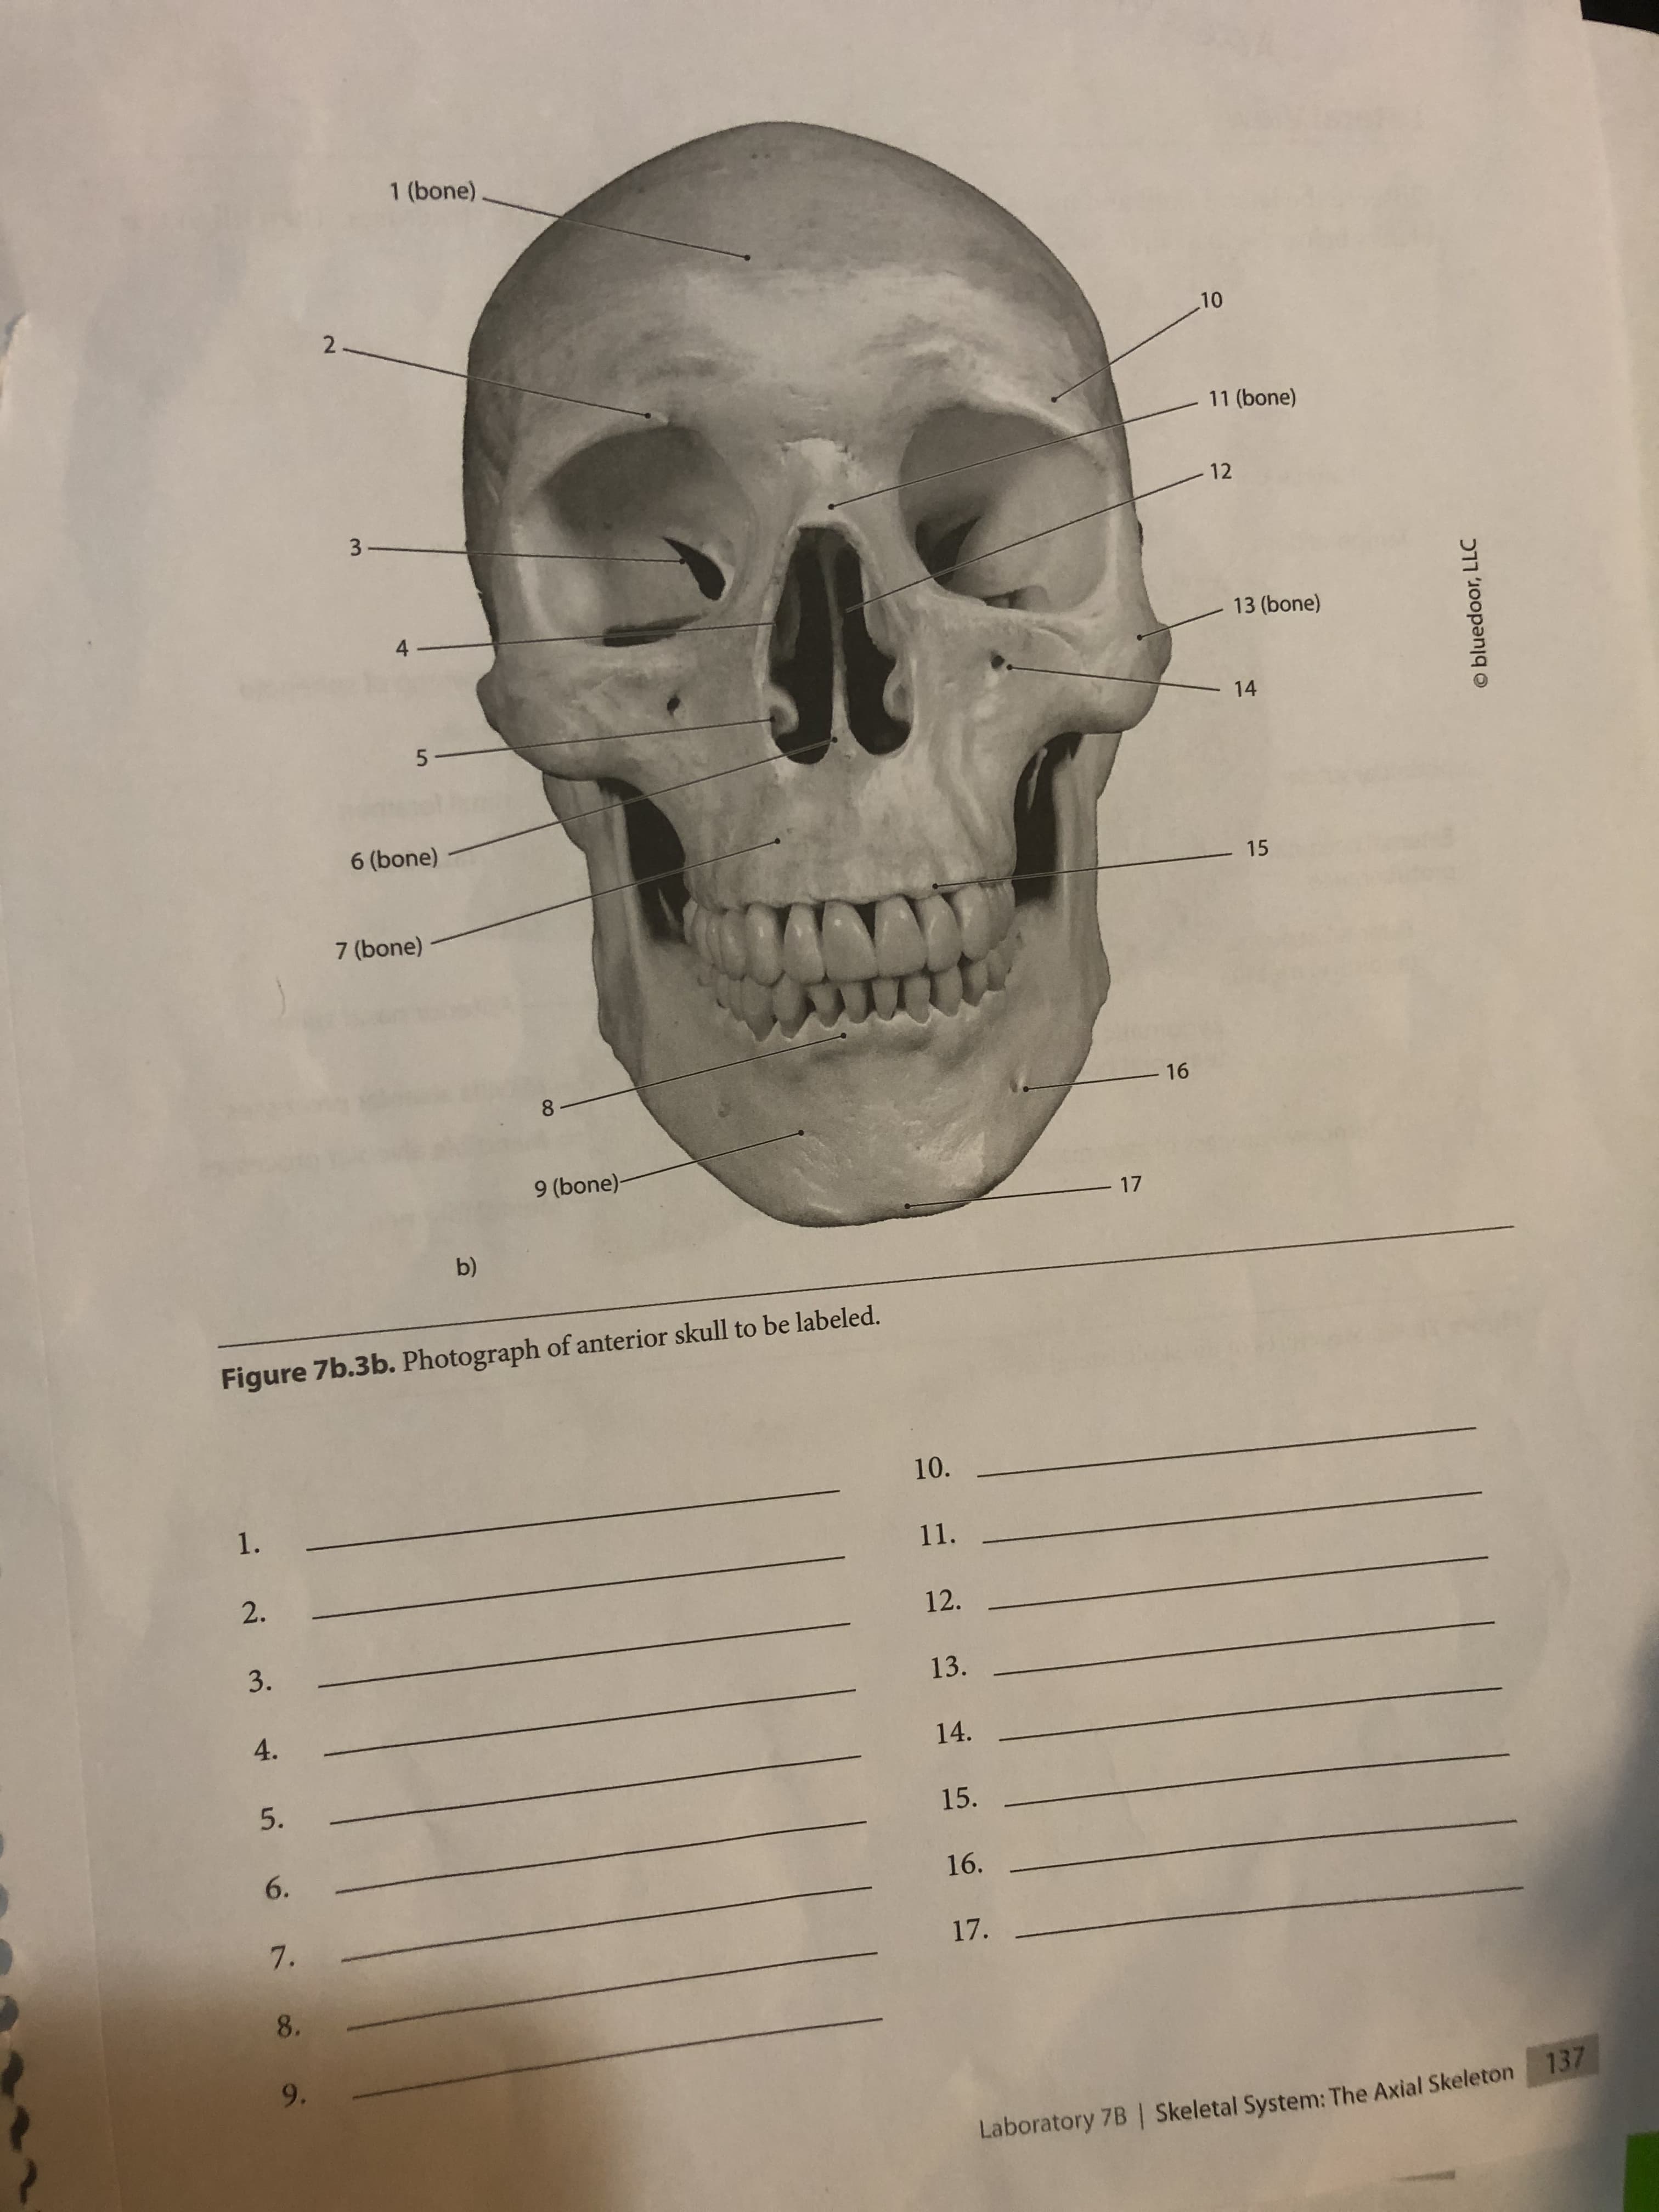 1 (bone)
2-
10
11 (bone)
12
4
13 (bone)
14
6 (bone)
15
7 (bone)
8.
- 16
9 (bone)-
-17
b)
Figure 7b.3b. Photograph of anterior skull to be labeled.
10.
1.
11.
2.
12.
3.
13.
4.
14.
5.
15.
6.
16.
7.
17.
8.
9.
137
Laboratory 7B Skeletal System: The Axial Skeleton
O bluedoor, LLC
5.
3.
